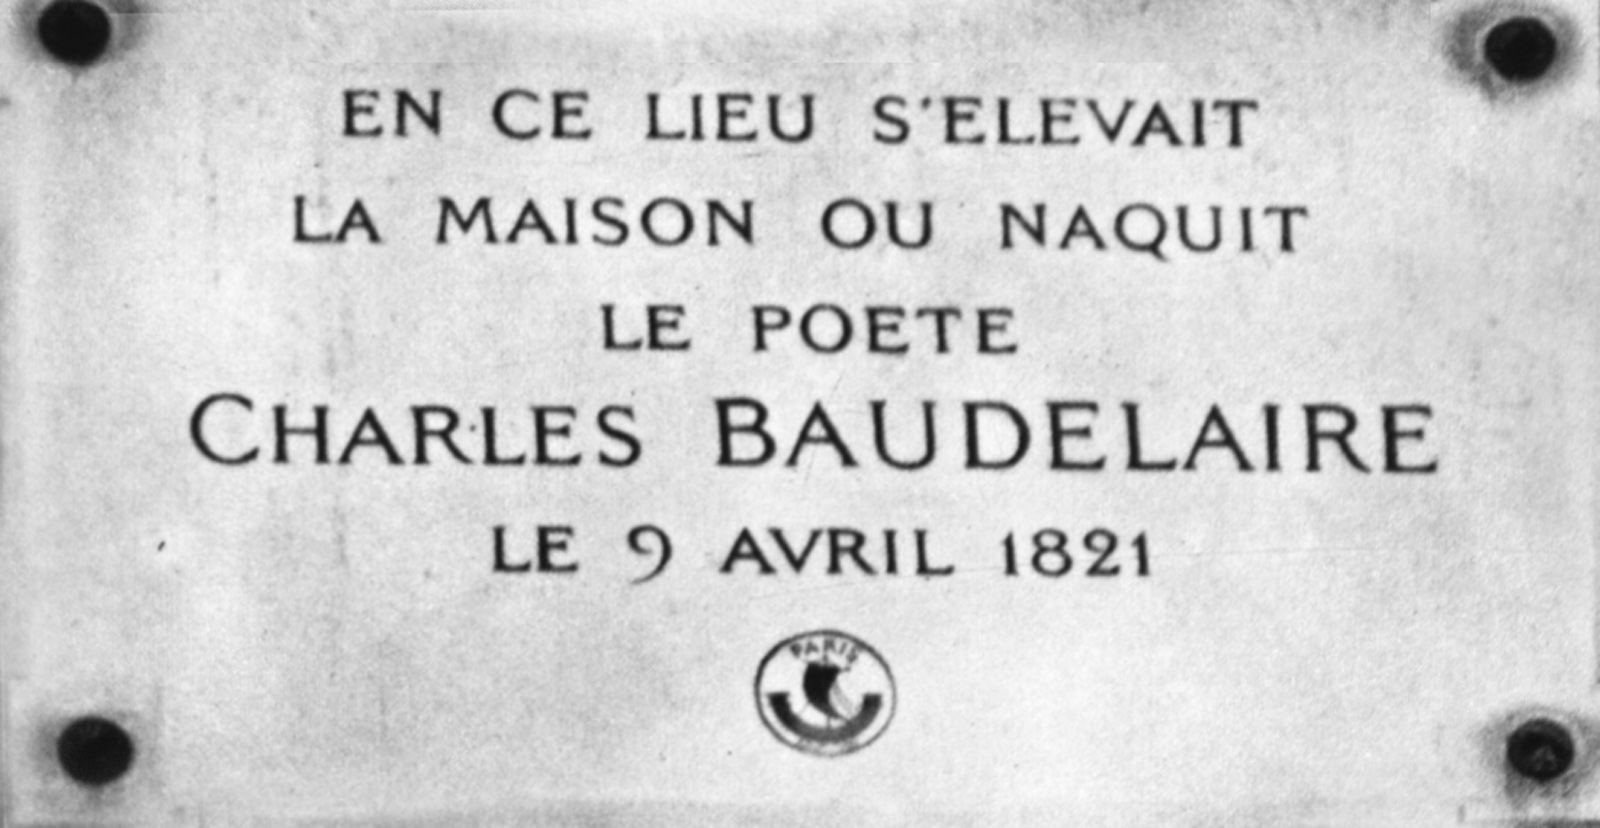 The plaque commemorating the centenary Baudelaire